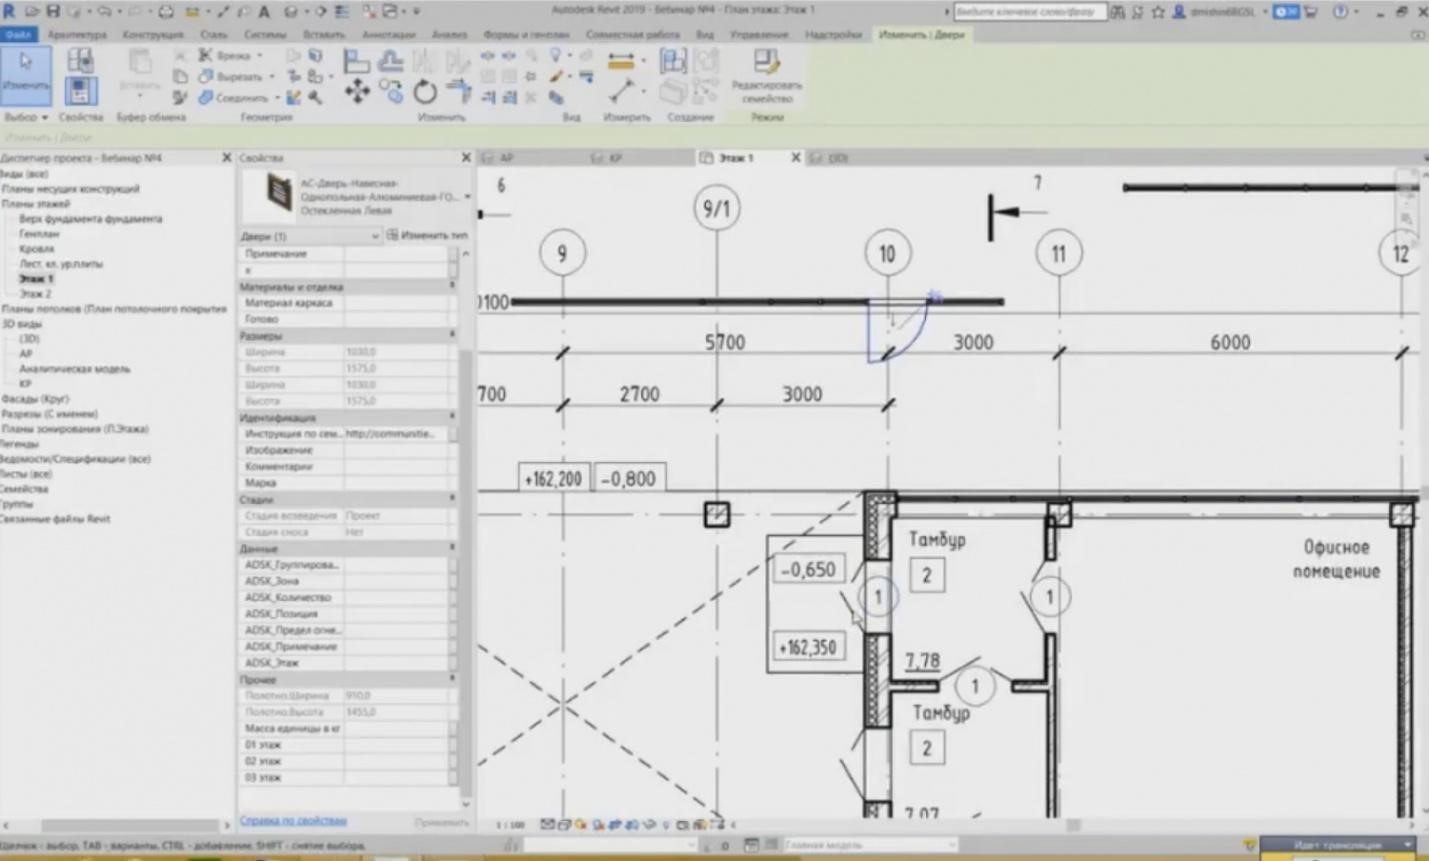 BIM DESIGN IN REVIT. CREATING ARCHITECTURAL AND STRUCTURAL ELEMENTS. PAGE 2-32